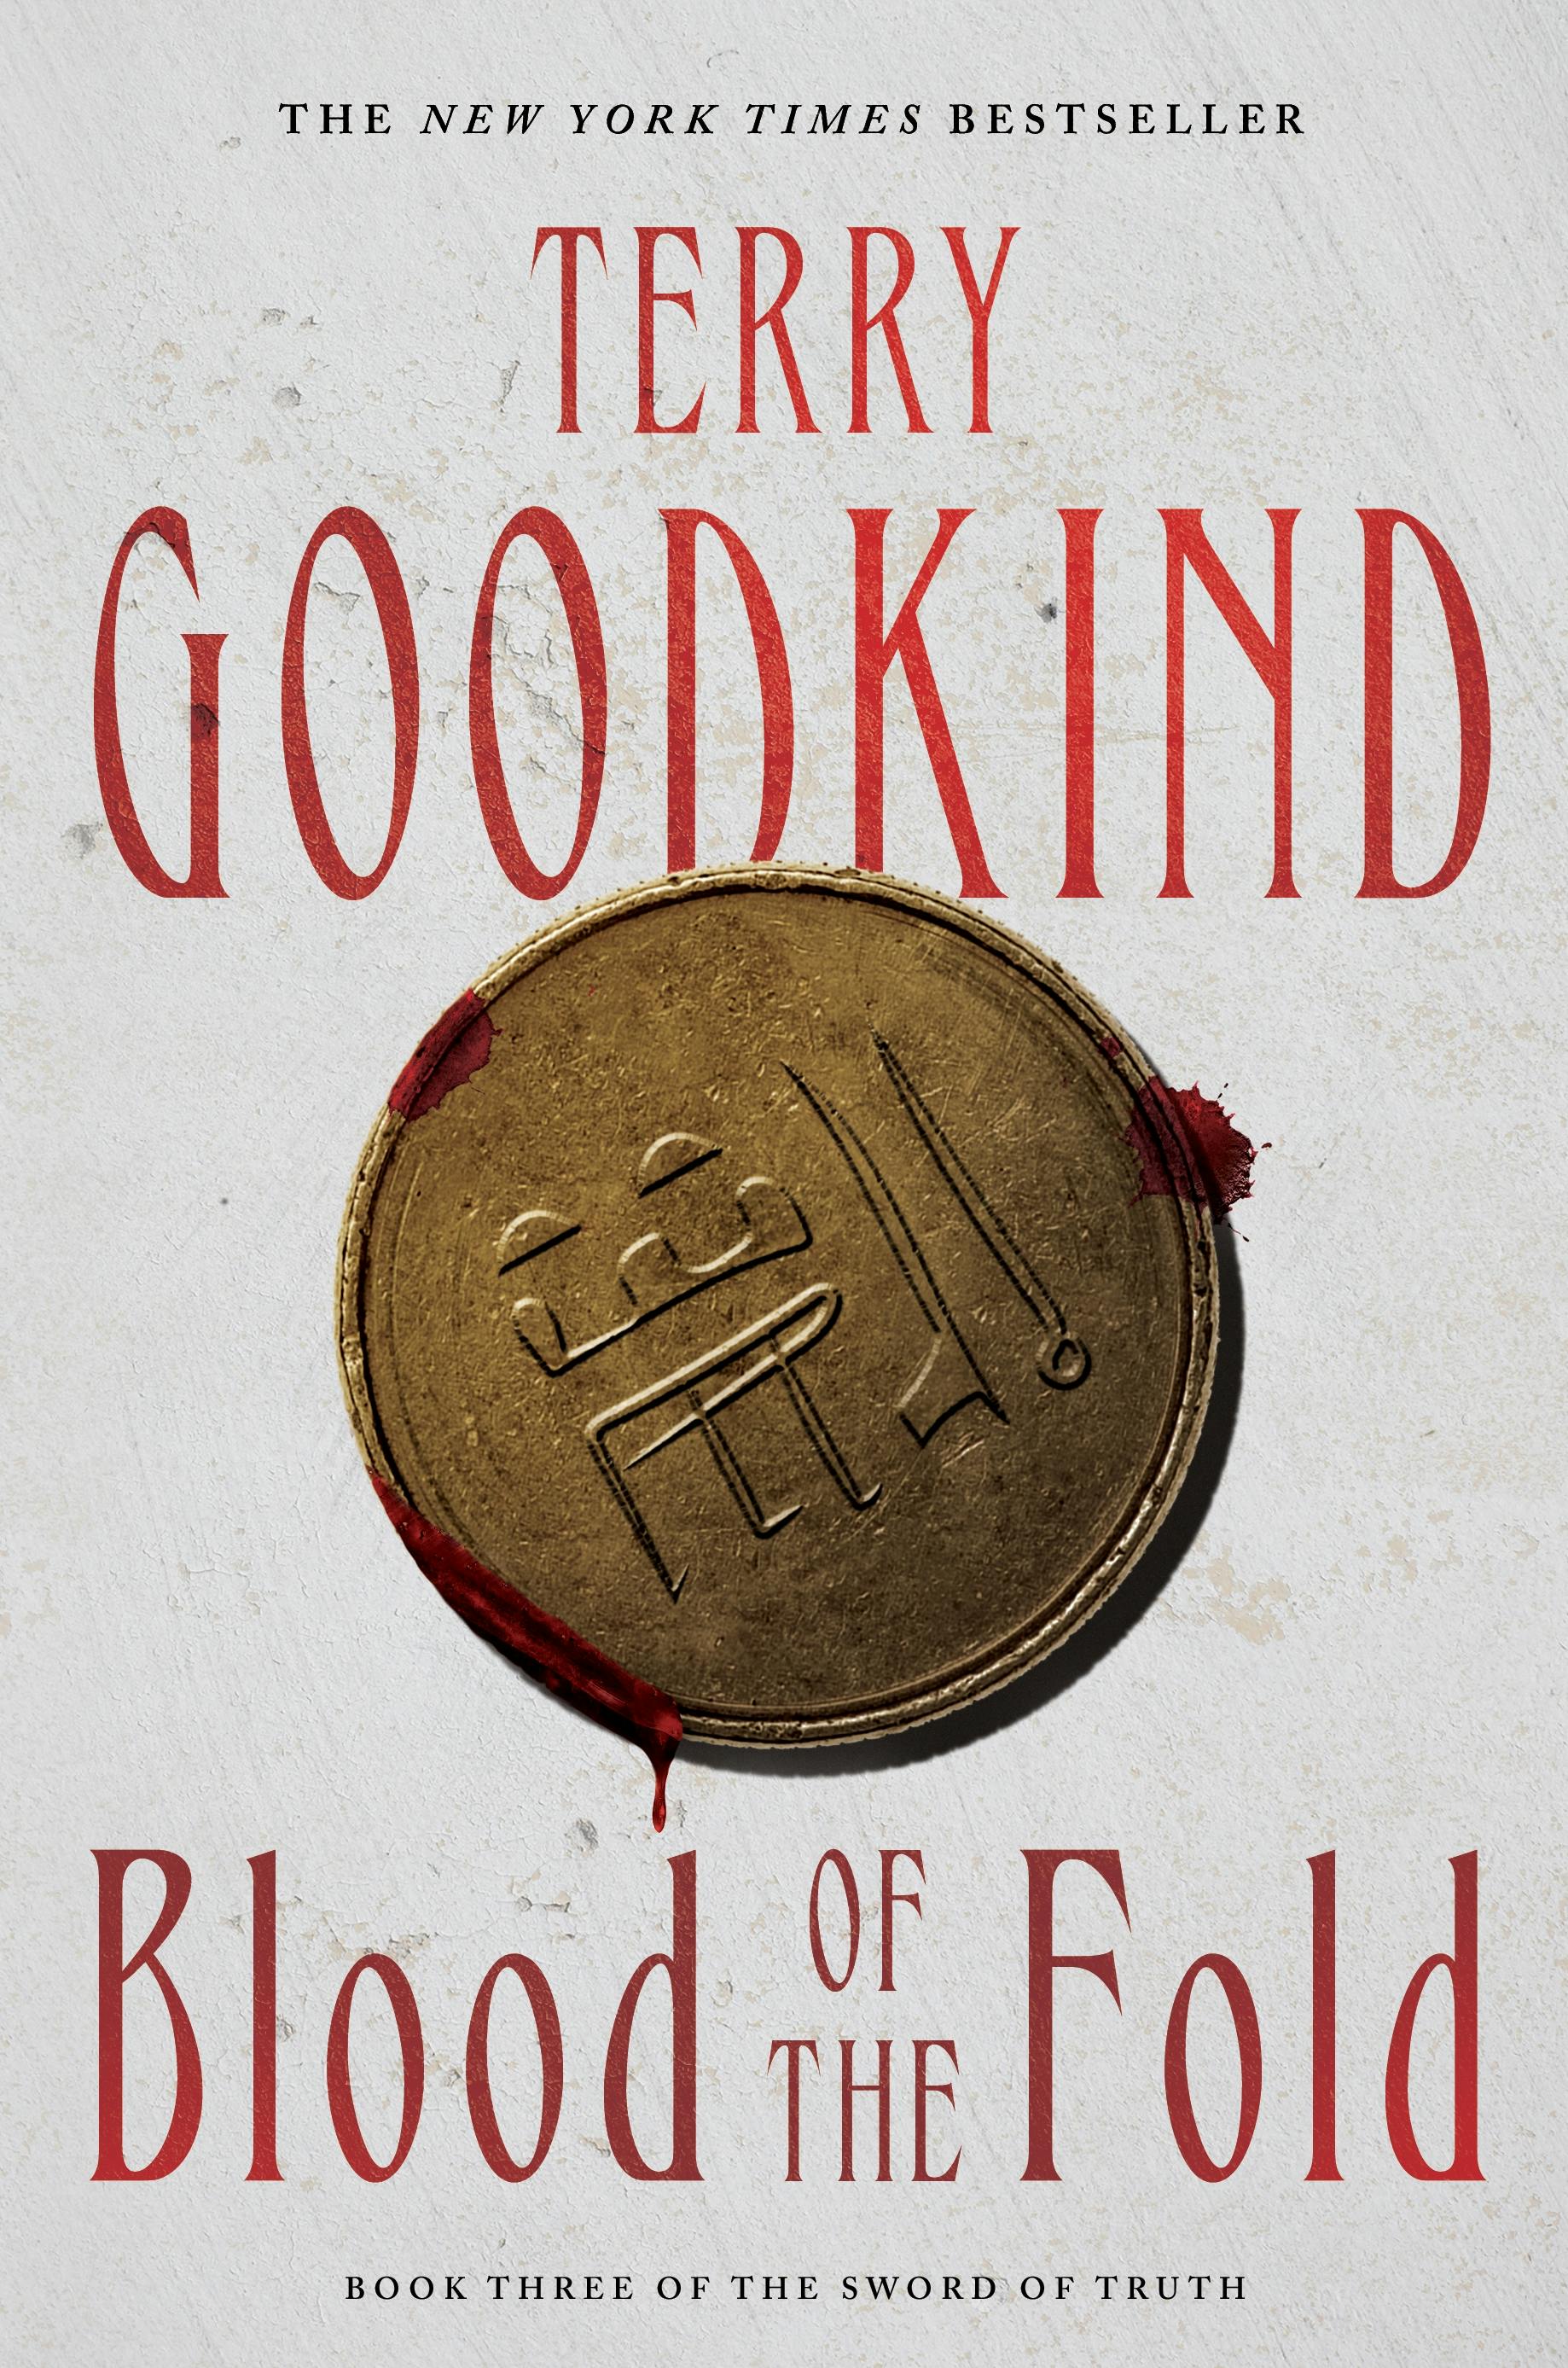 Cover for the book titled as: Blood of the Fold